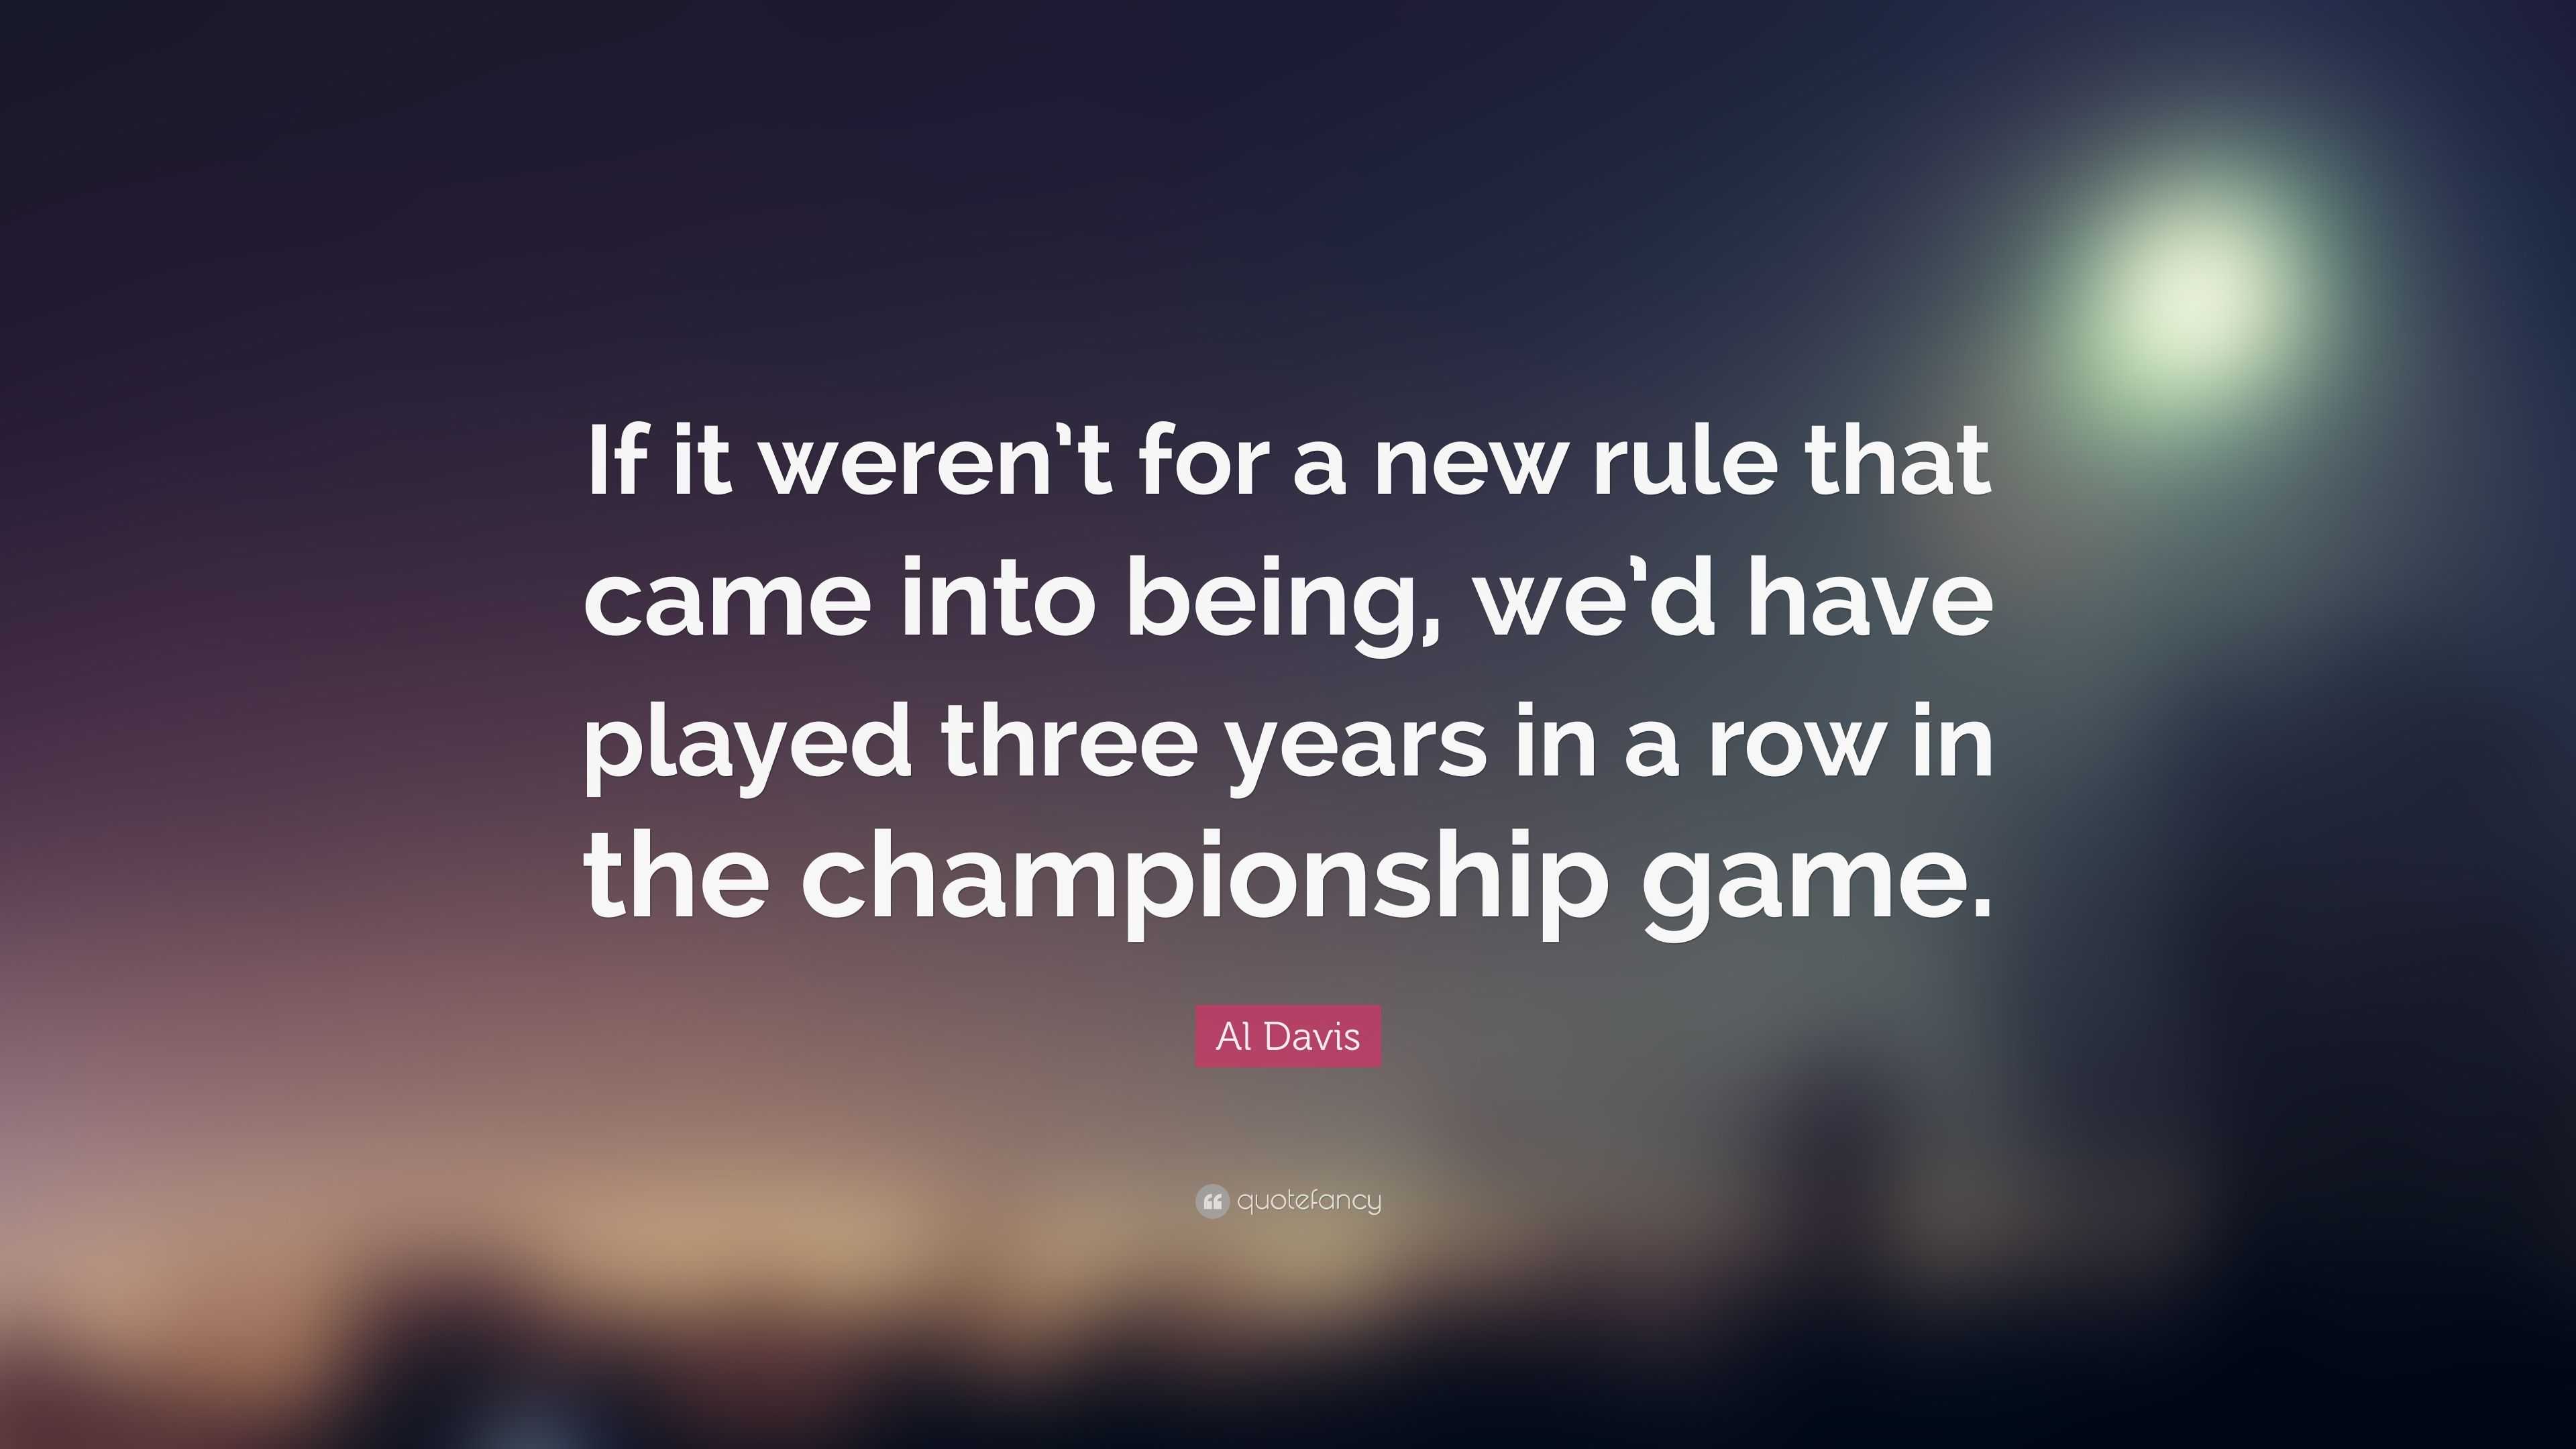 Al Davis Quote: “If it weren’t for a new rule that came into being, we ...